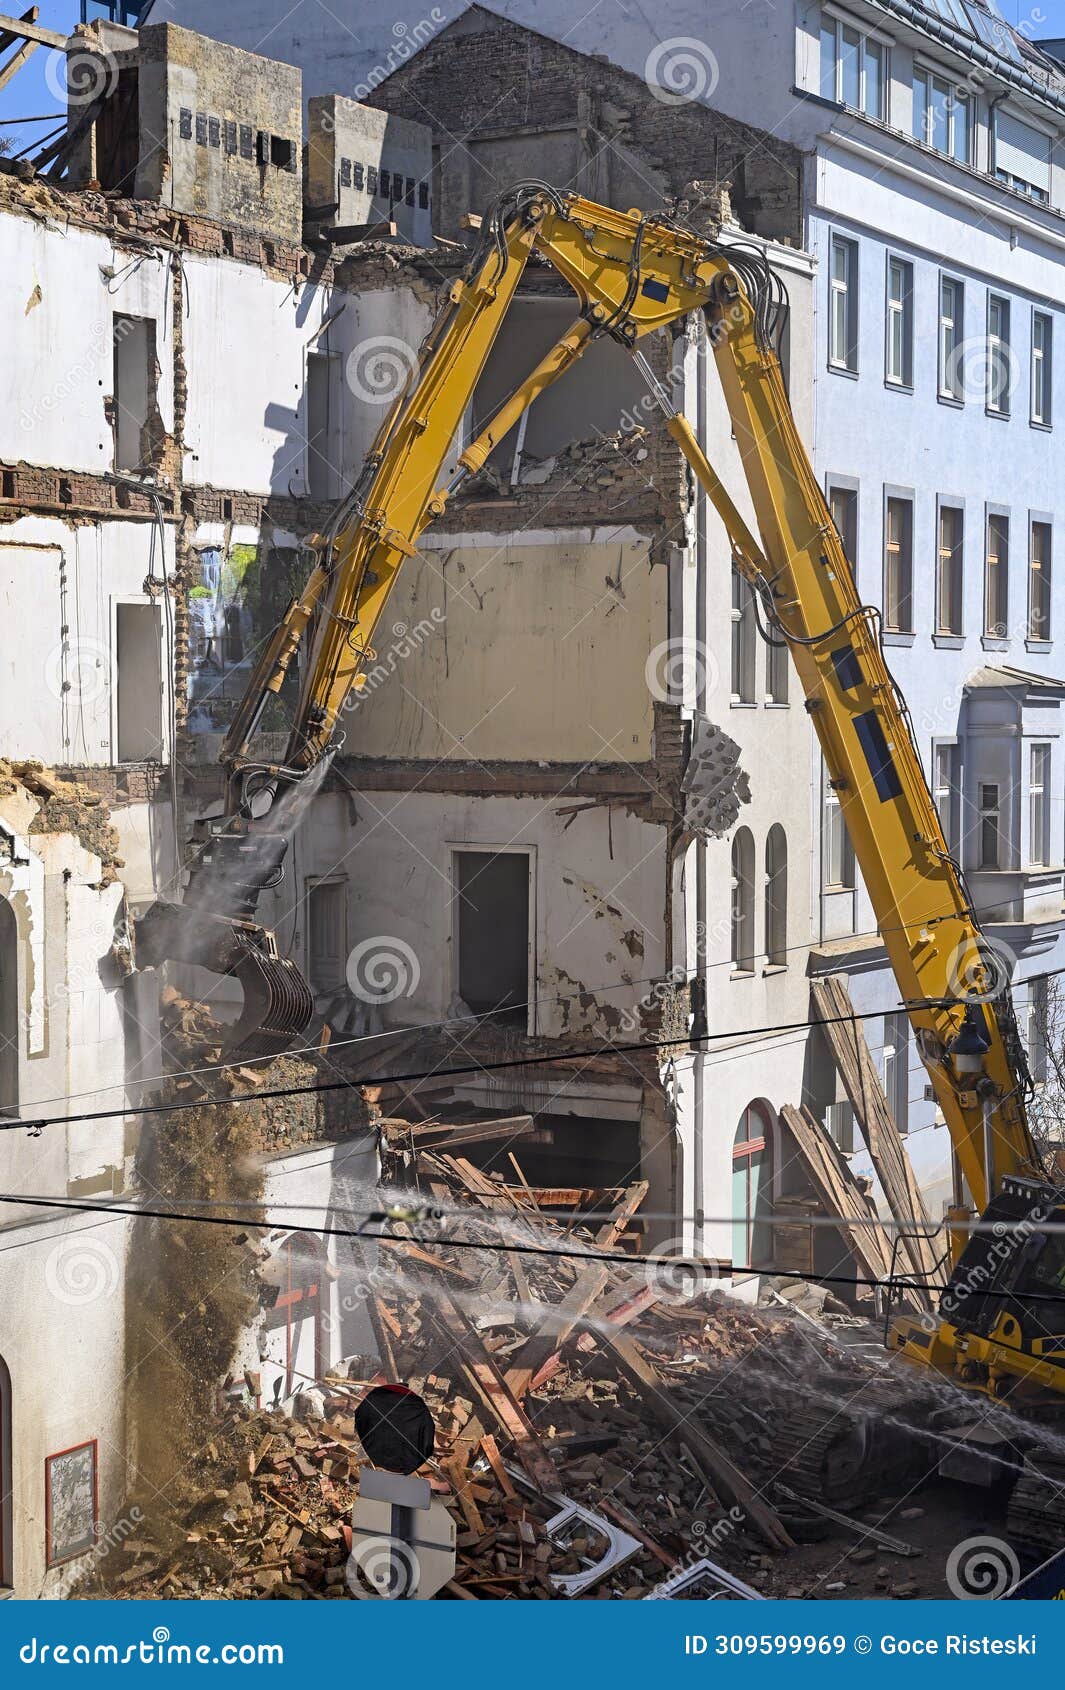 a bulldozer is demolishing an old building in vienna